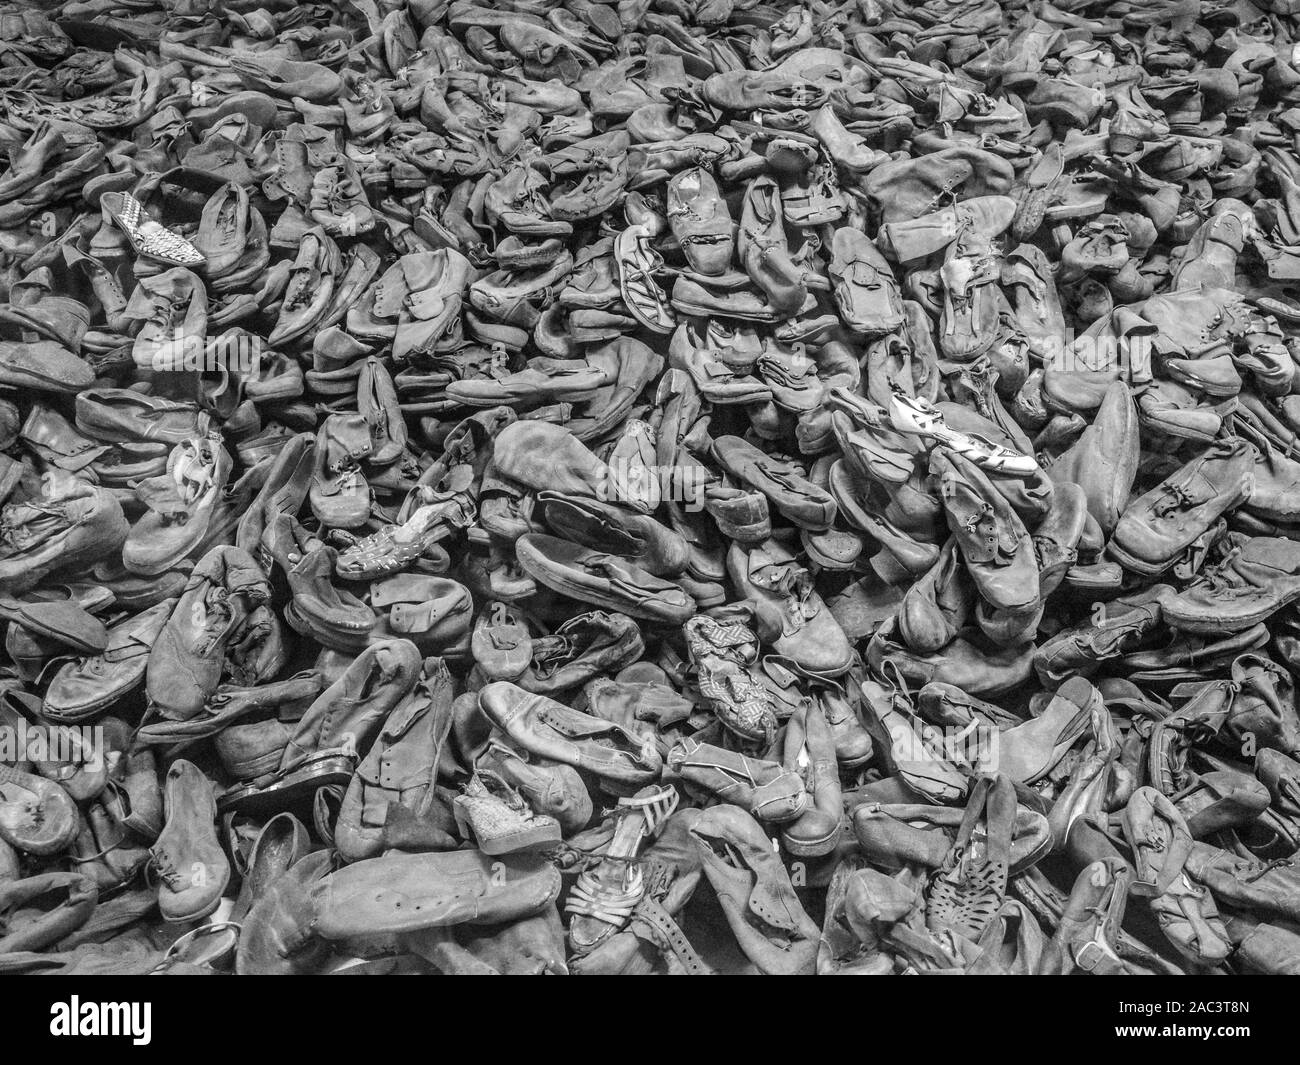 Auschwitz, Oświęcim, Poland - June 05, 2019: The shoes from the people who were killed in Auschwitz. The biggest nazi concentration camp in Europe dur Stock Photo